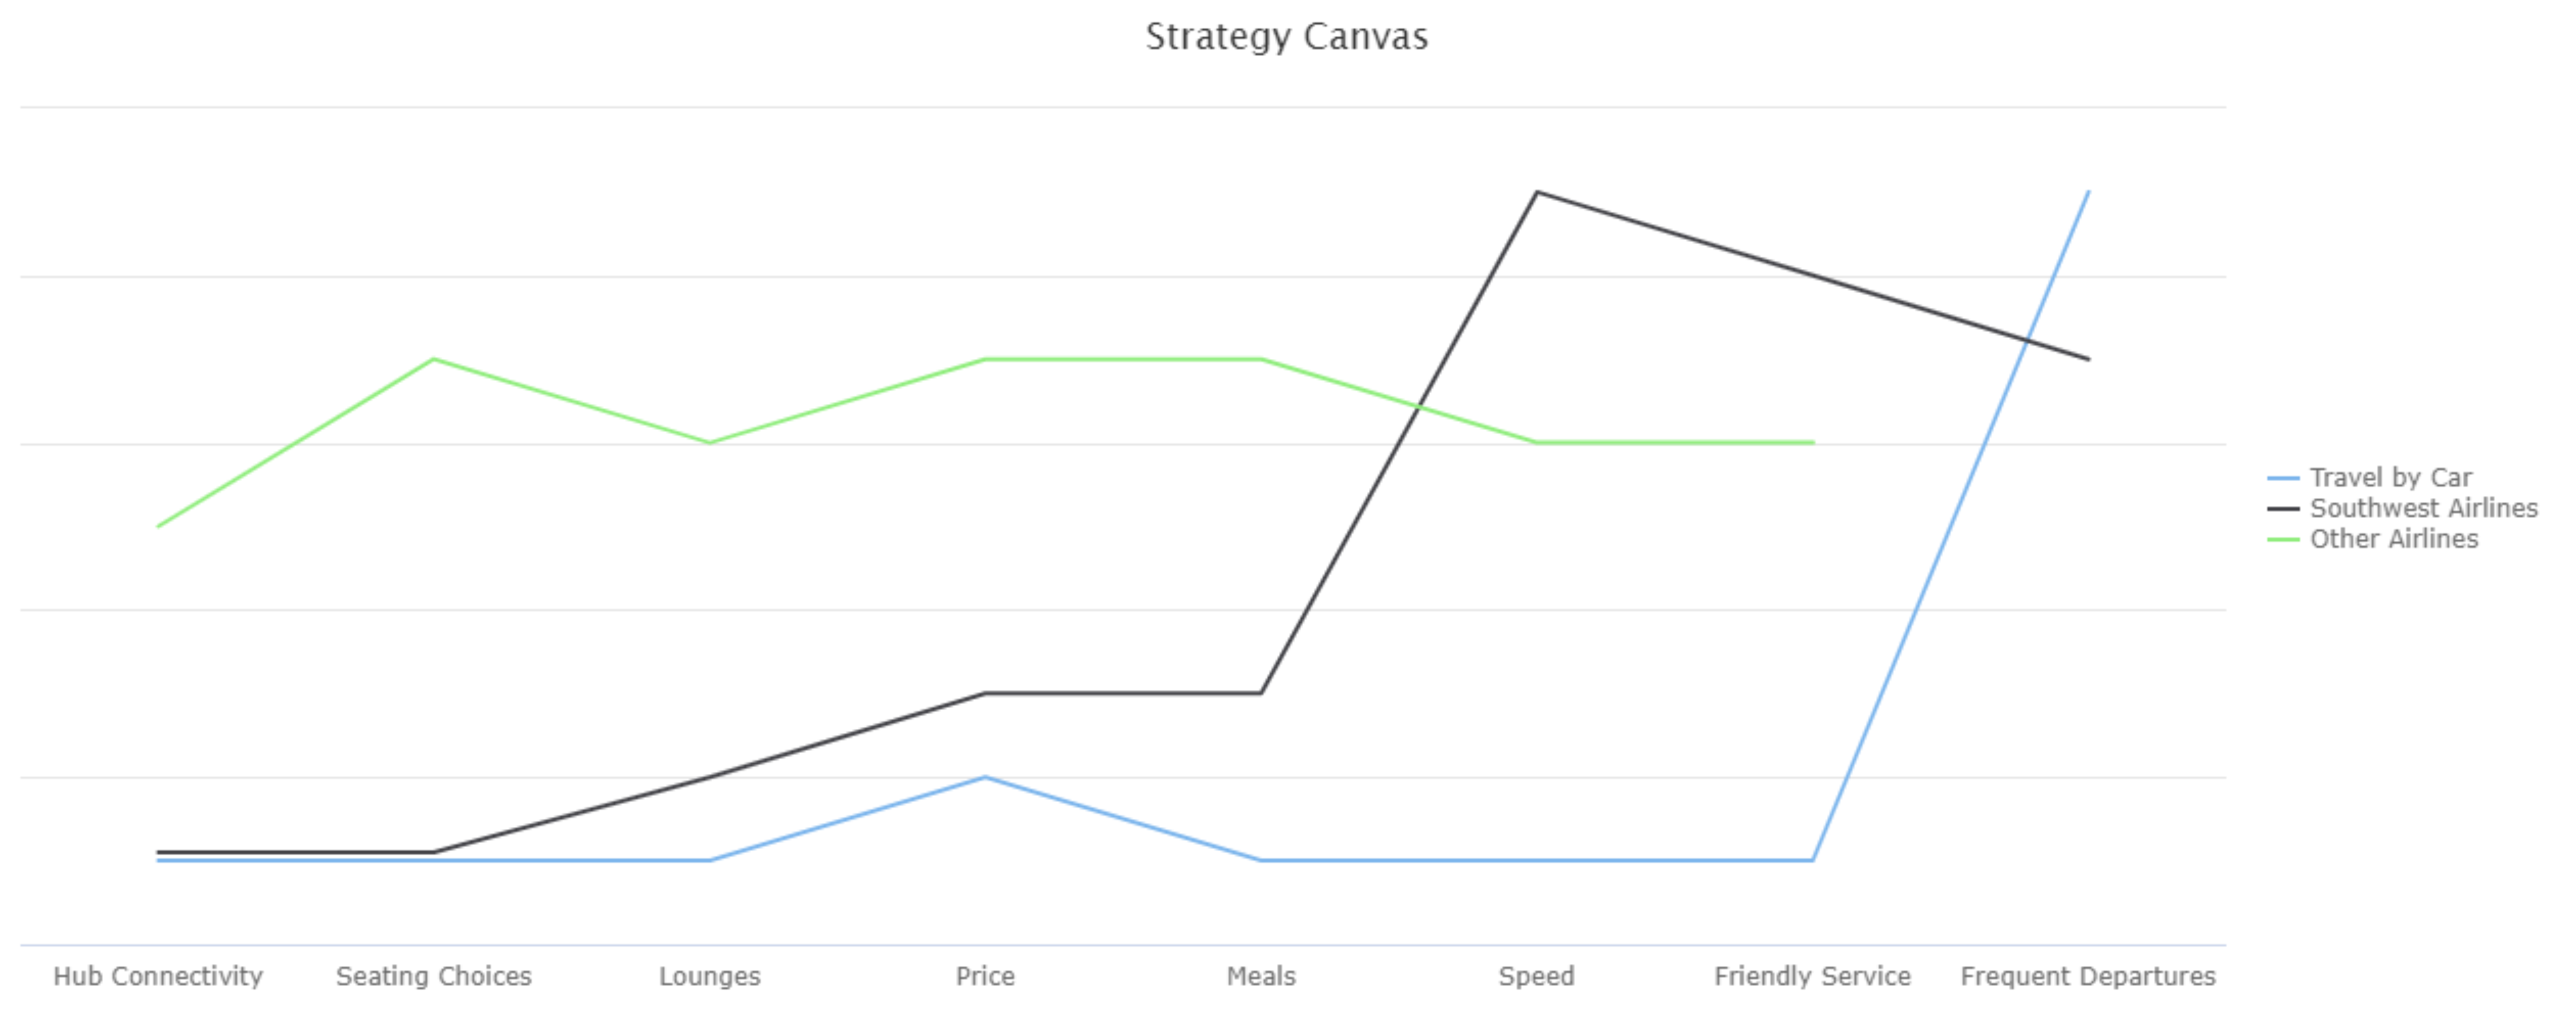 Strategy Canvas for Southwest Airlines